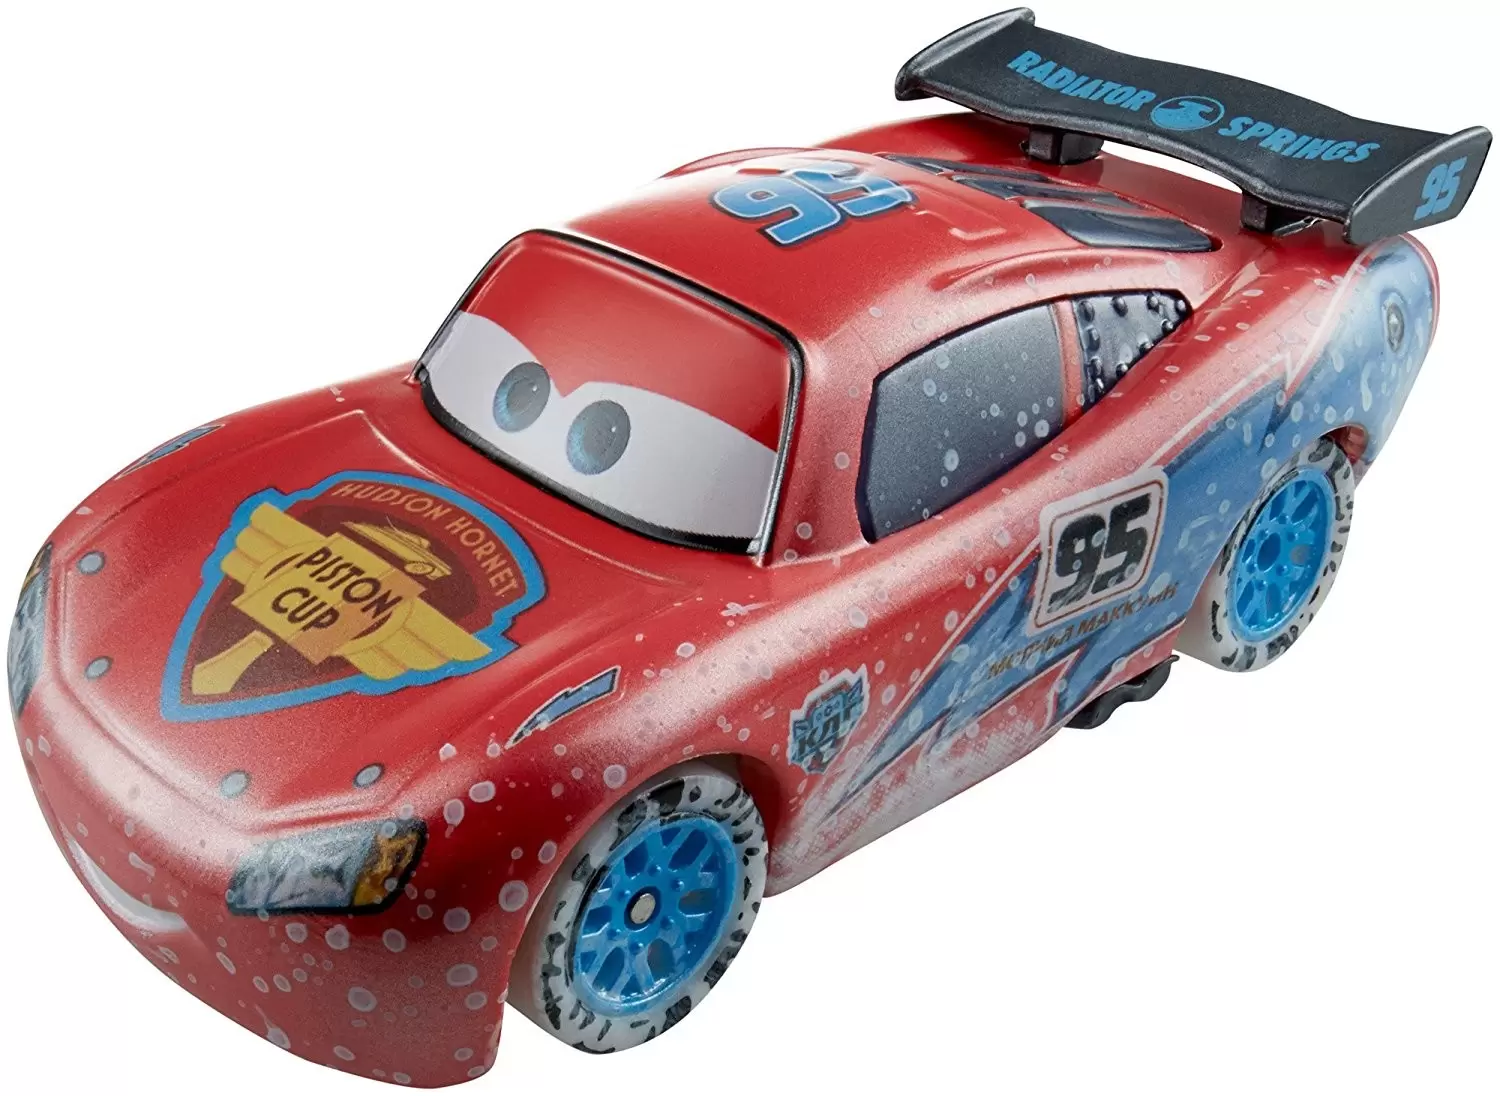 Véhicule Cars Ice Racers Flash McQueen 